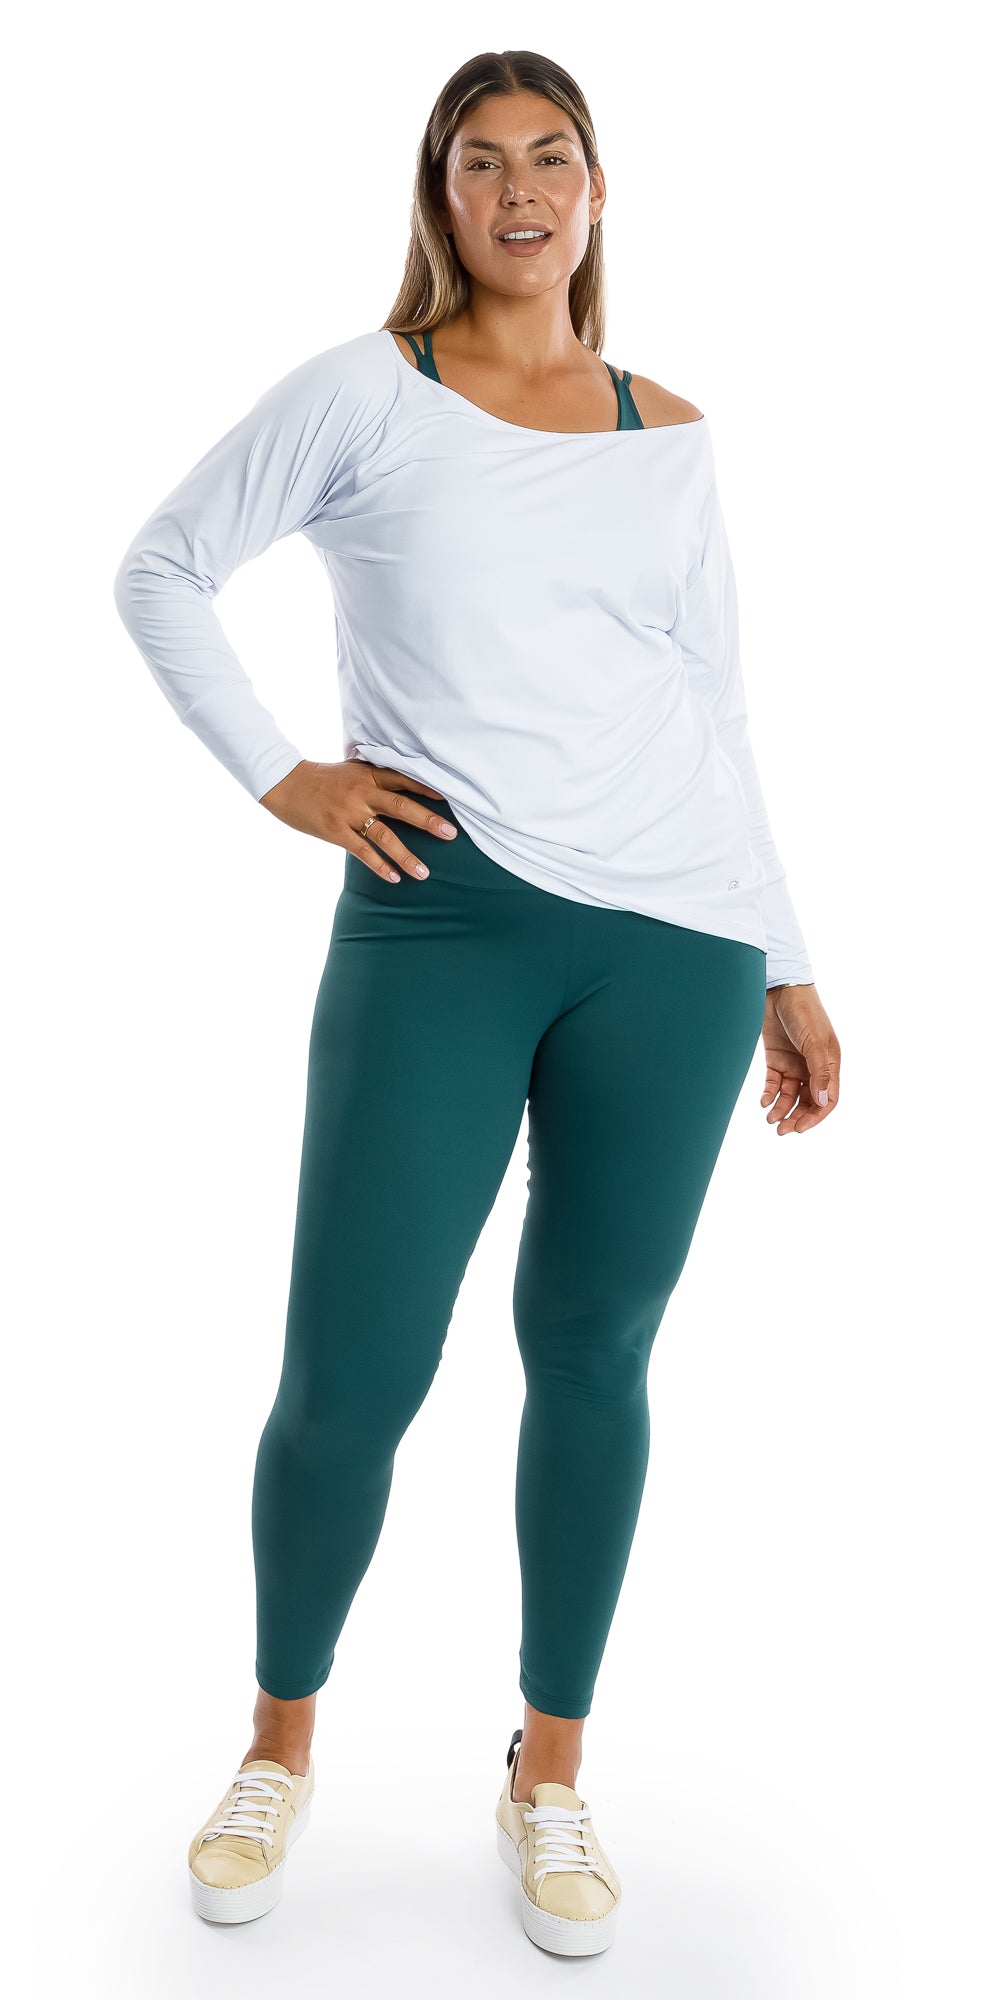 Full body front view of lady in White Off The Shoulder Long Sleeve Tee and teal coloured leggings leaning on left leg and putting right hand on waist